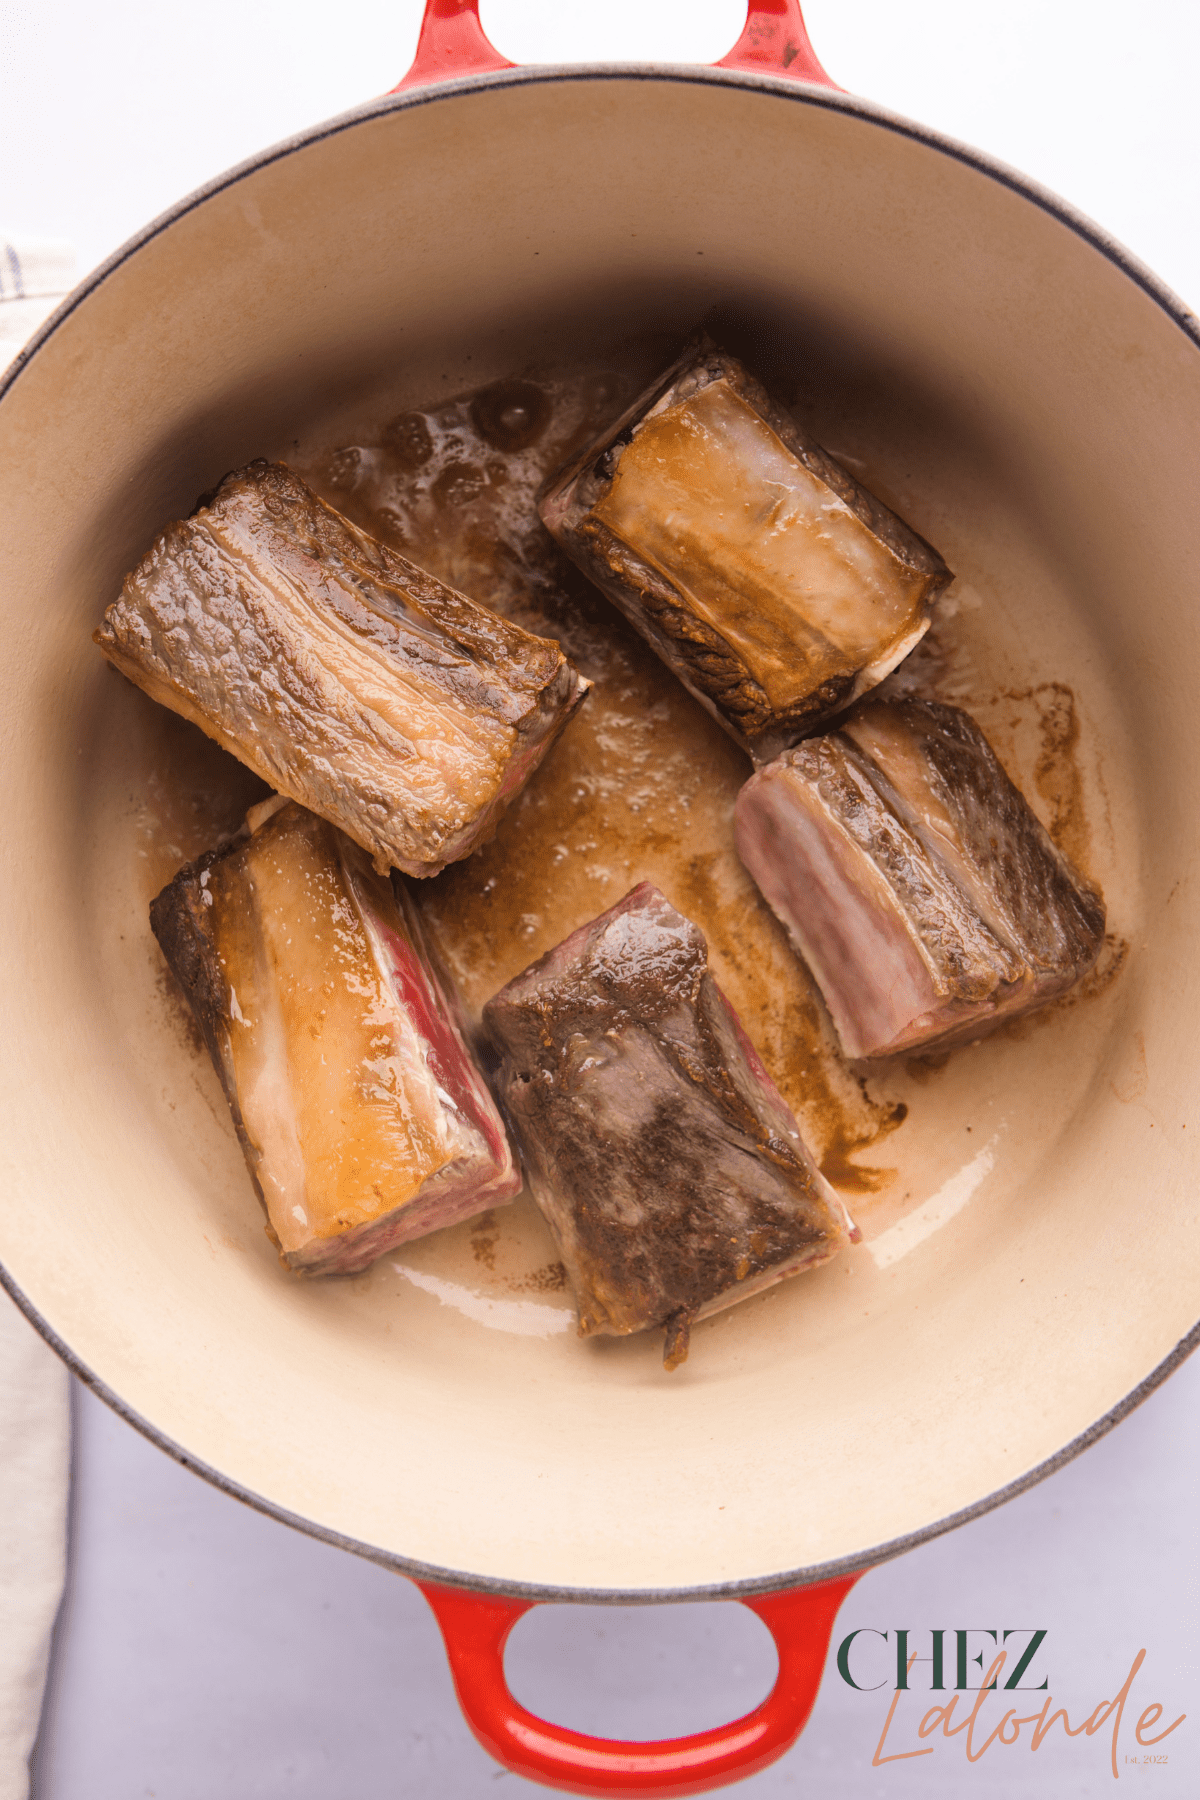 Sear short ribs in a dutch oven until golden brown.